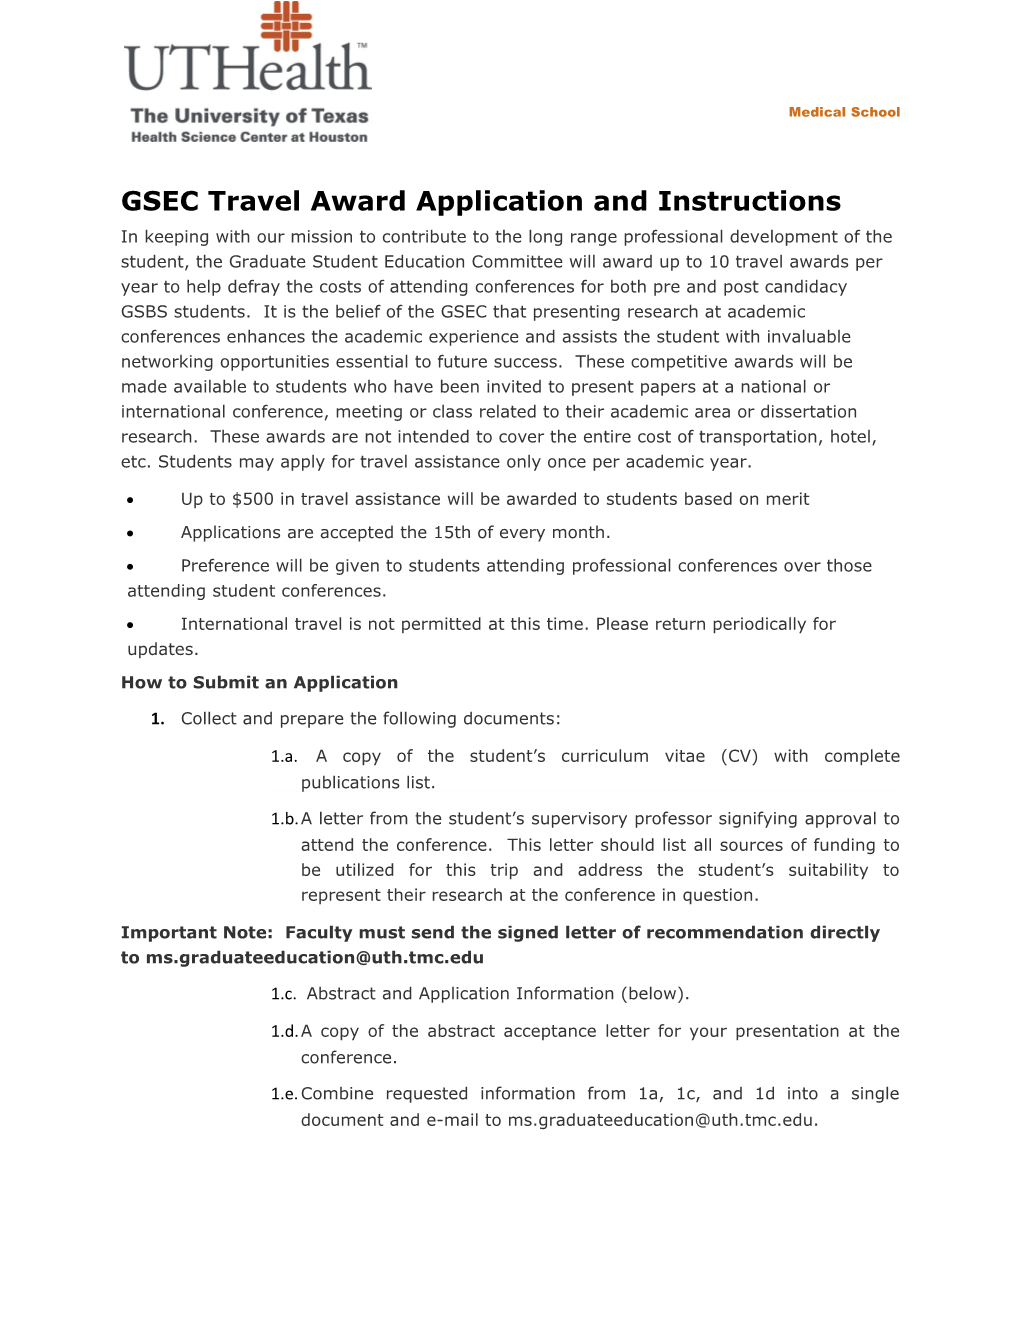 GSEC Travel Award Application and Instructions